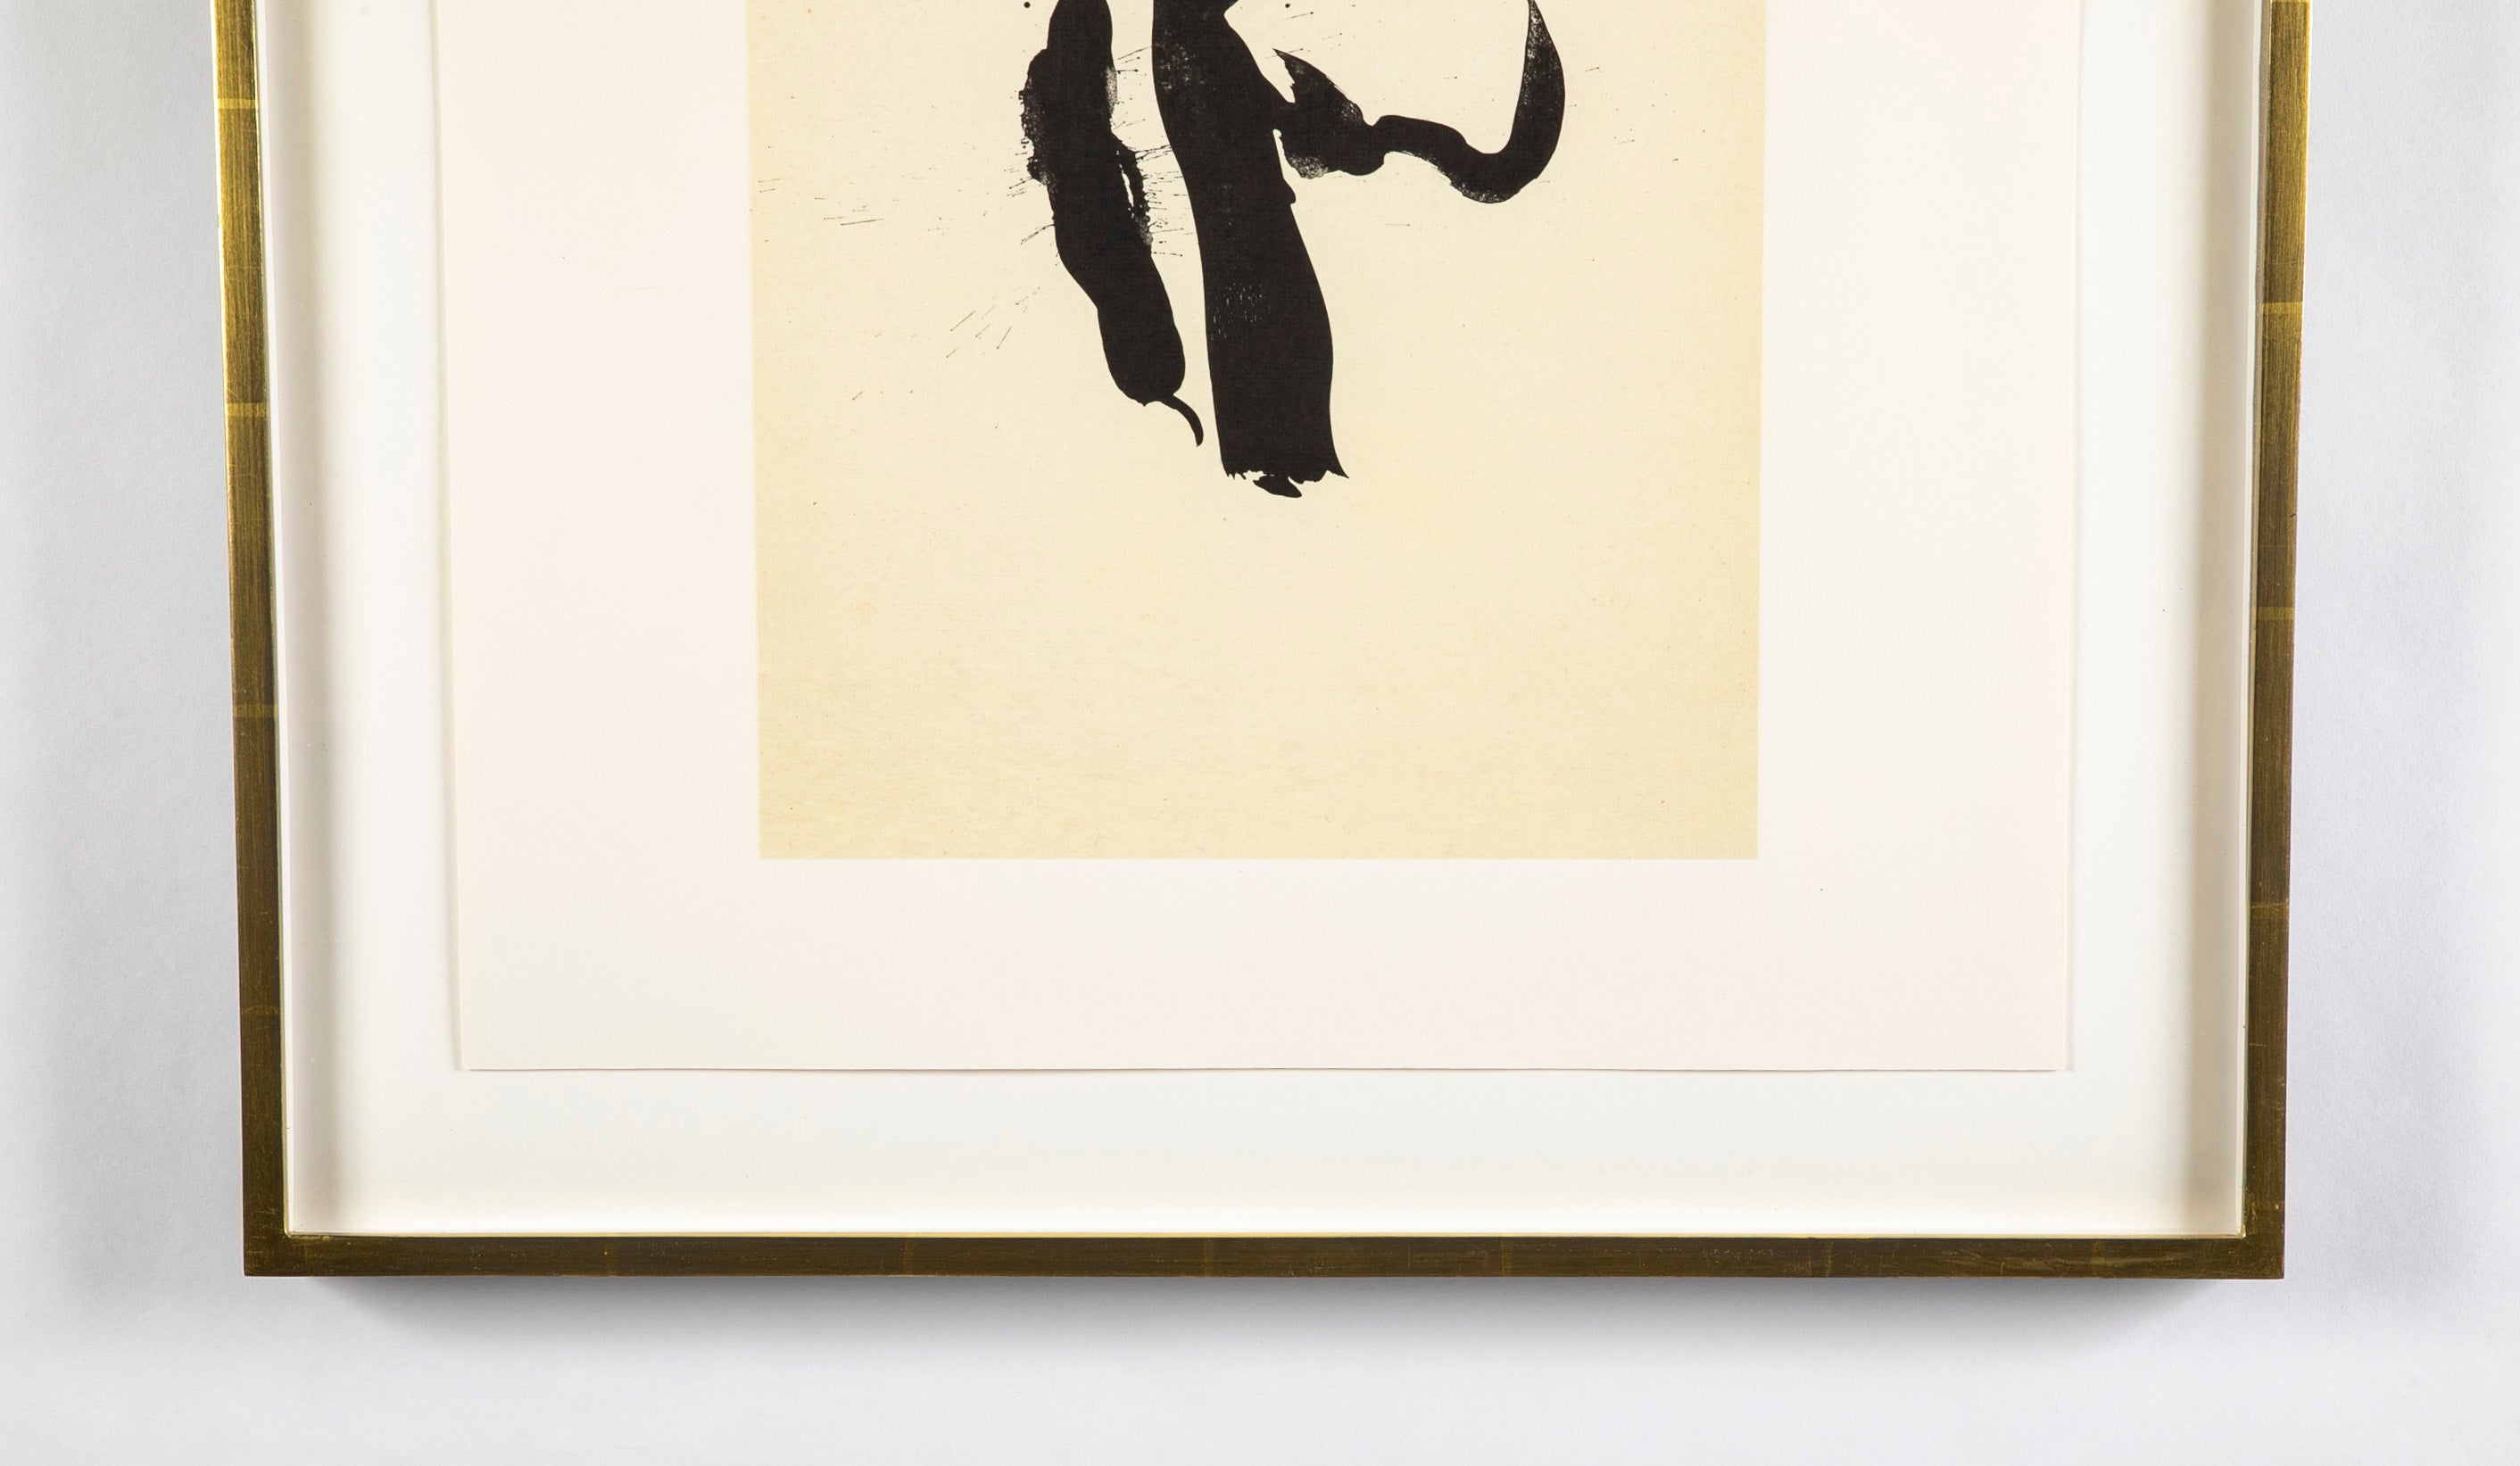 Robert Motherwell Lithograph "Je t' aime"